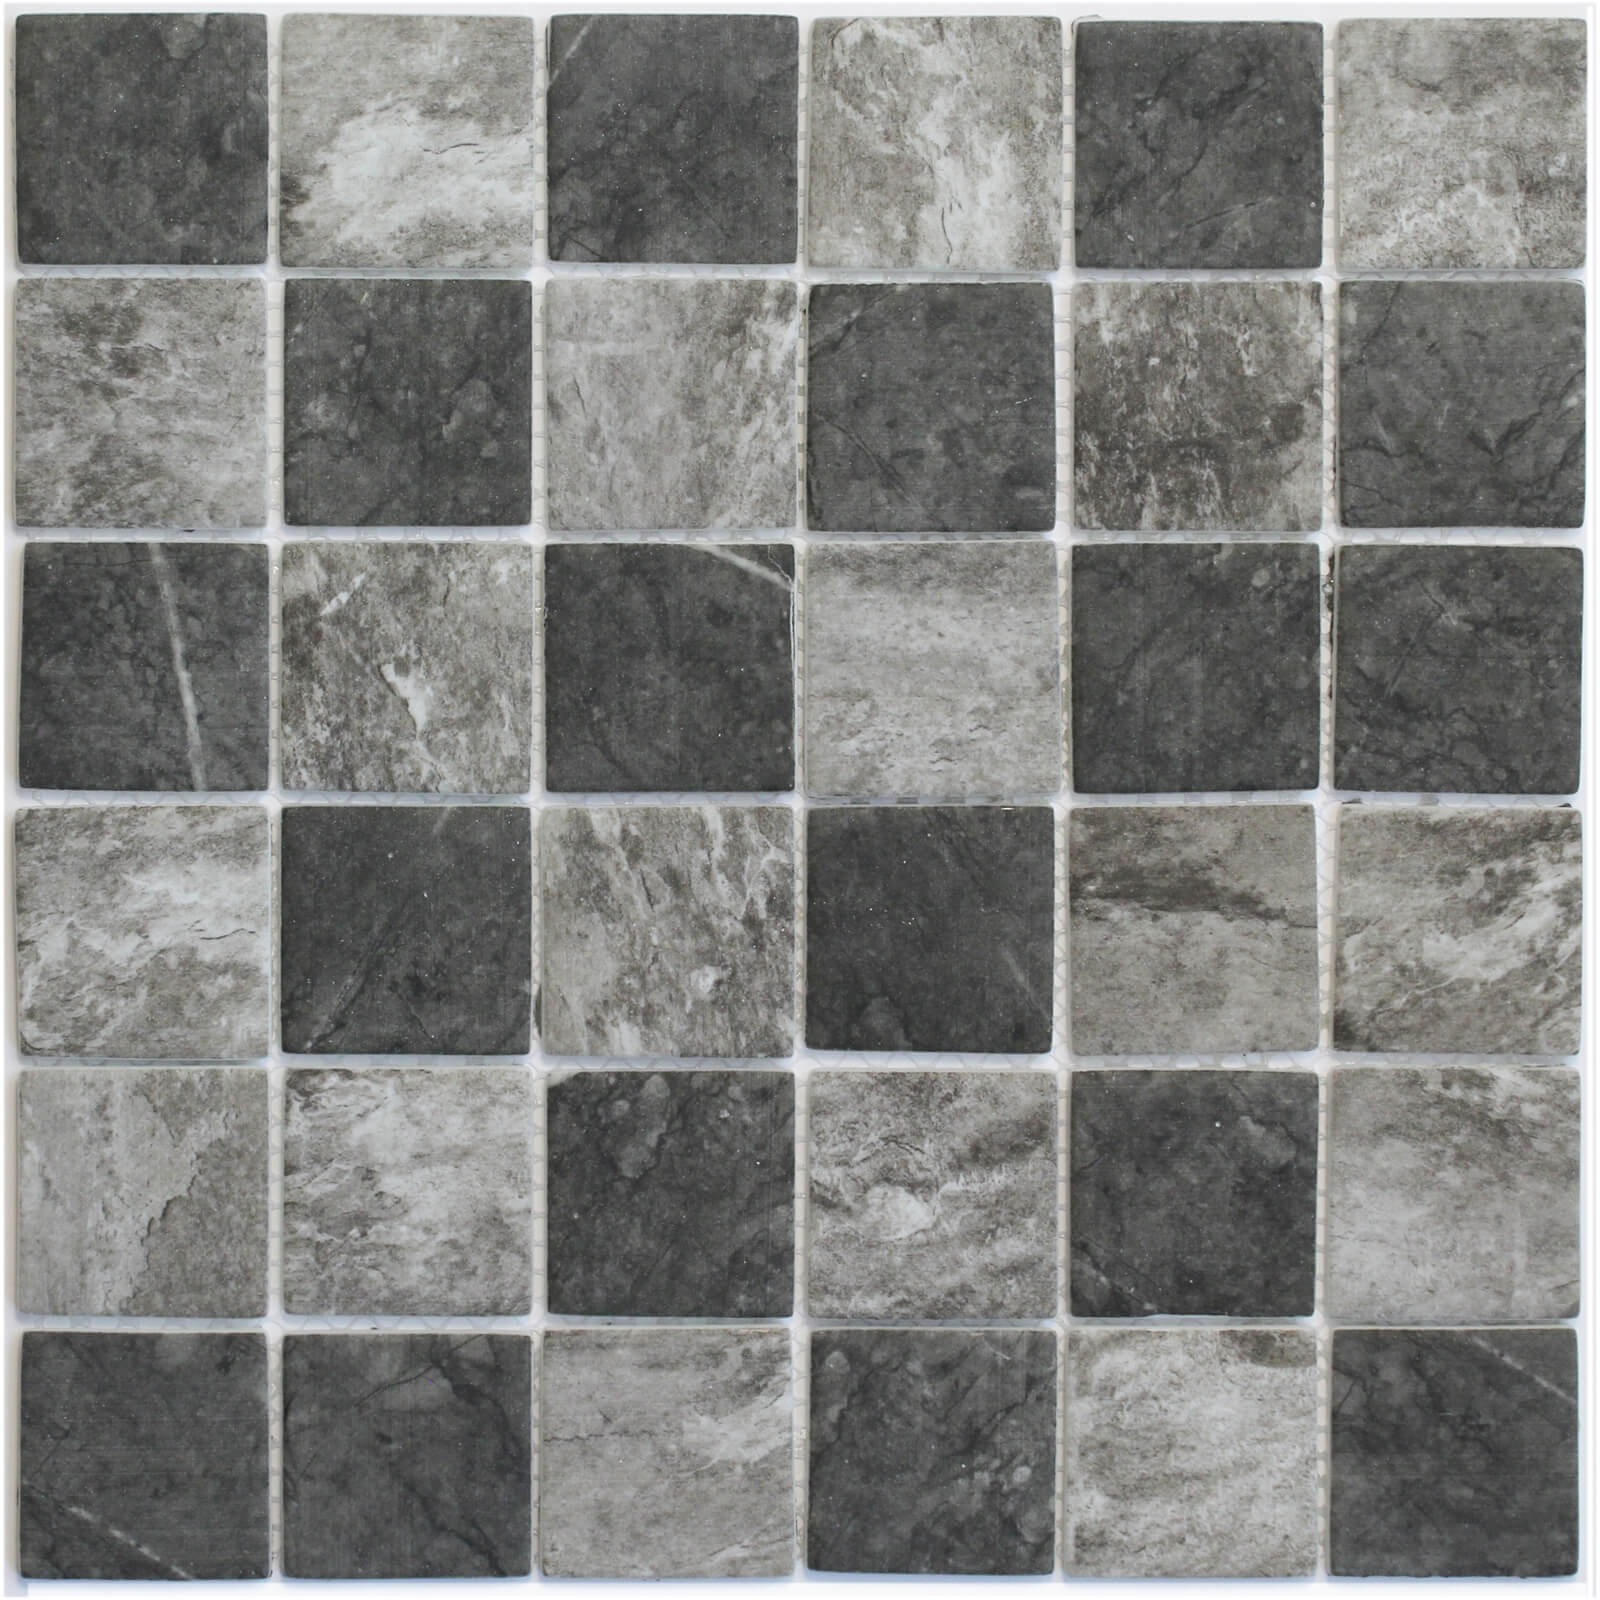 House of Mosaics Formation Mosaic Tile (Sample Only) - 150 x 110mm